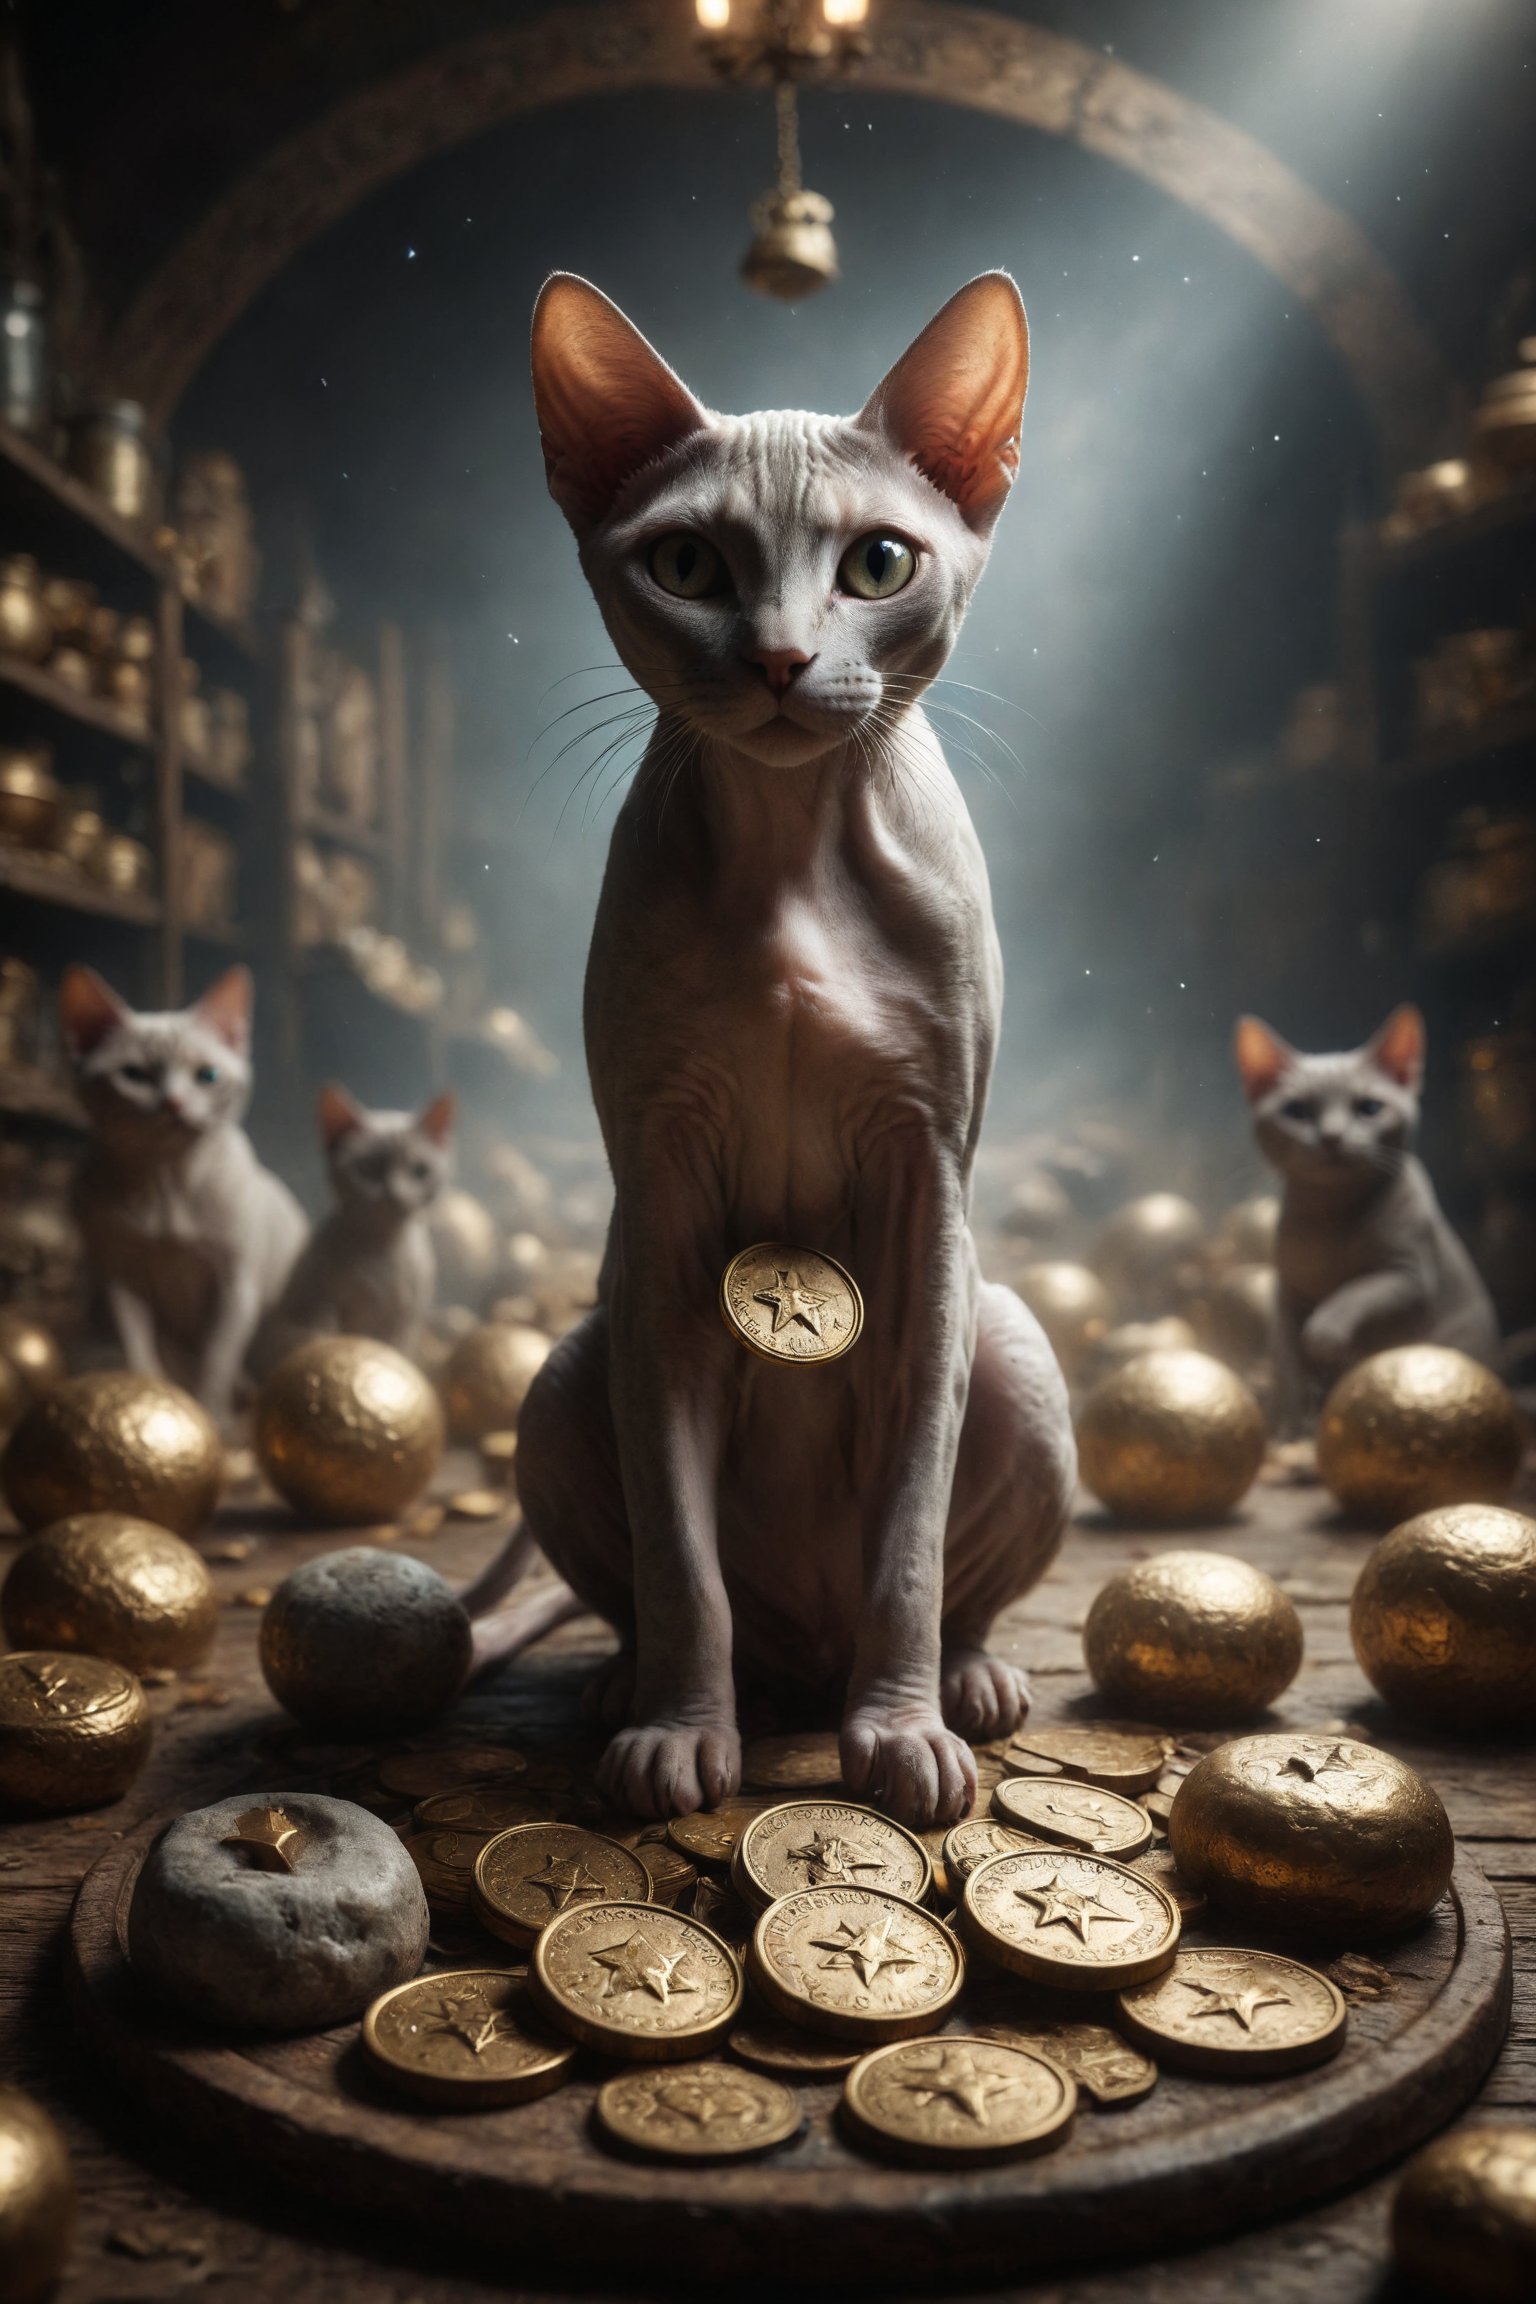 Generates a scene of a Sphynx cat distributing food to other cats in need, symbolizing generosity, charity and balance in giving and receiving and as decoration it must include 6 large coins with engraved pentacles